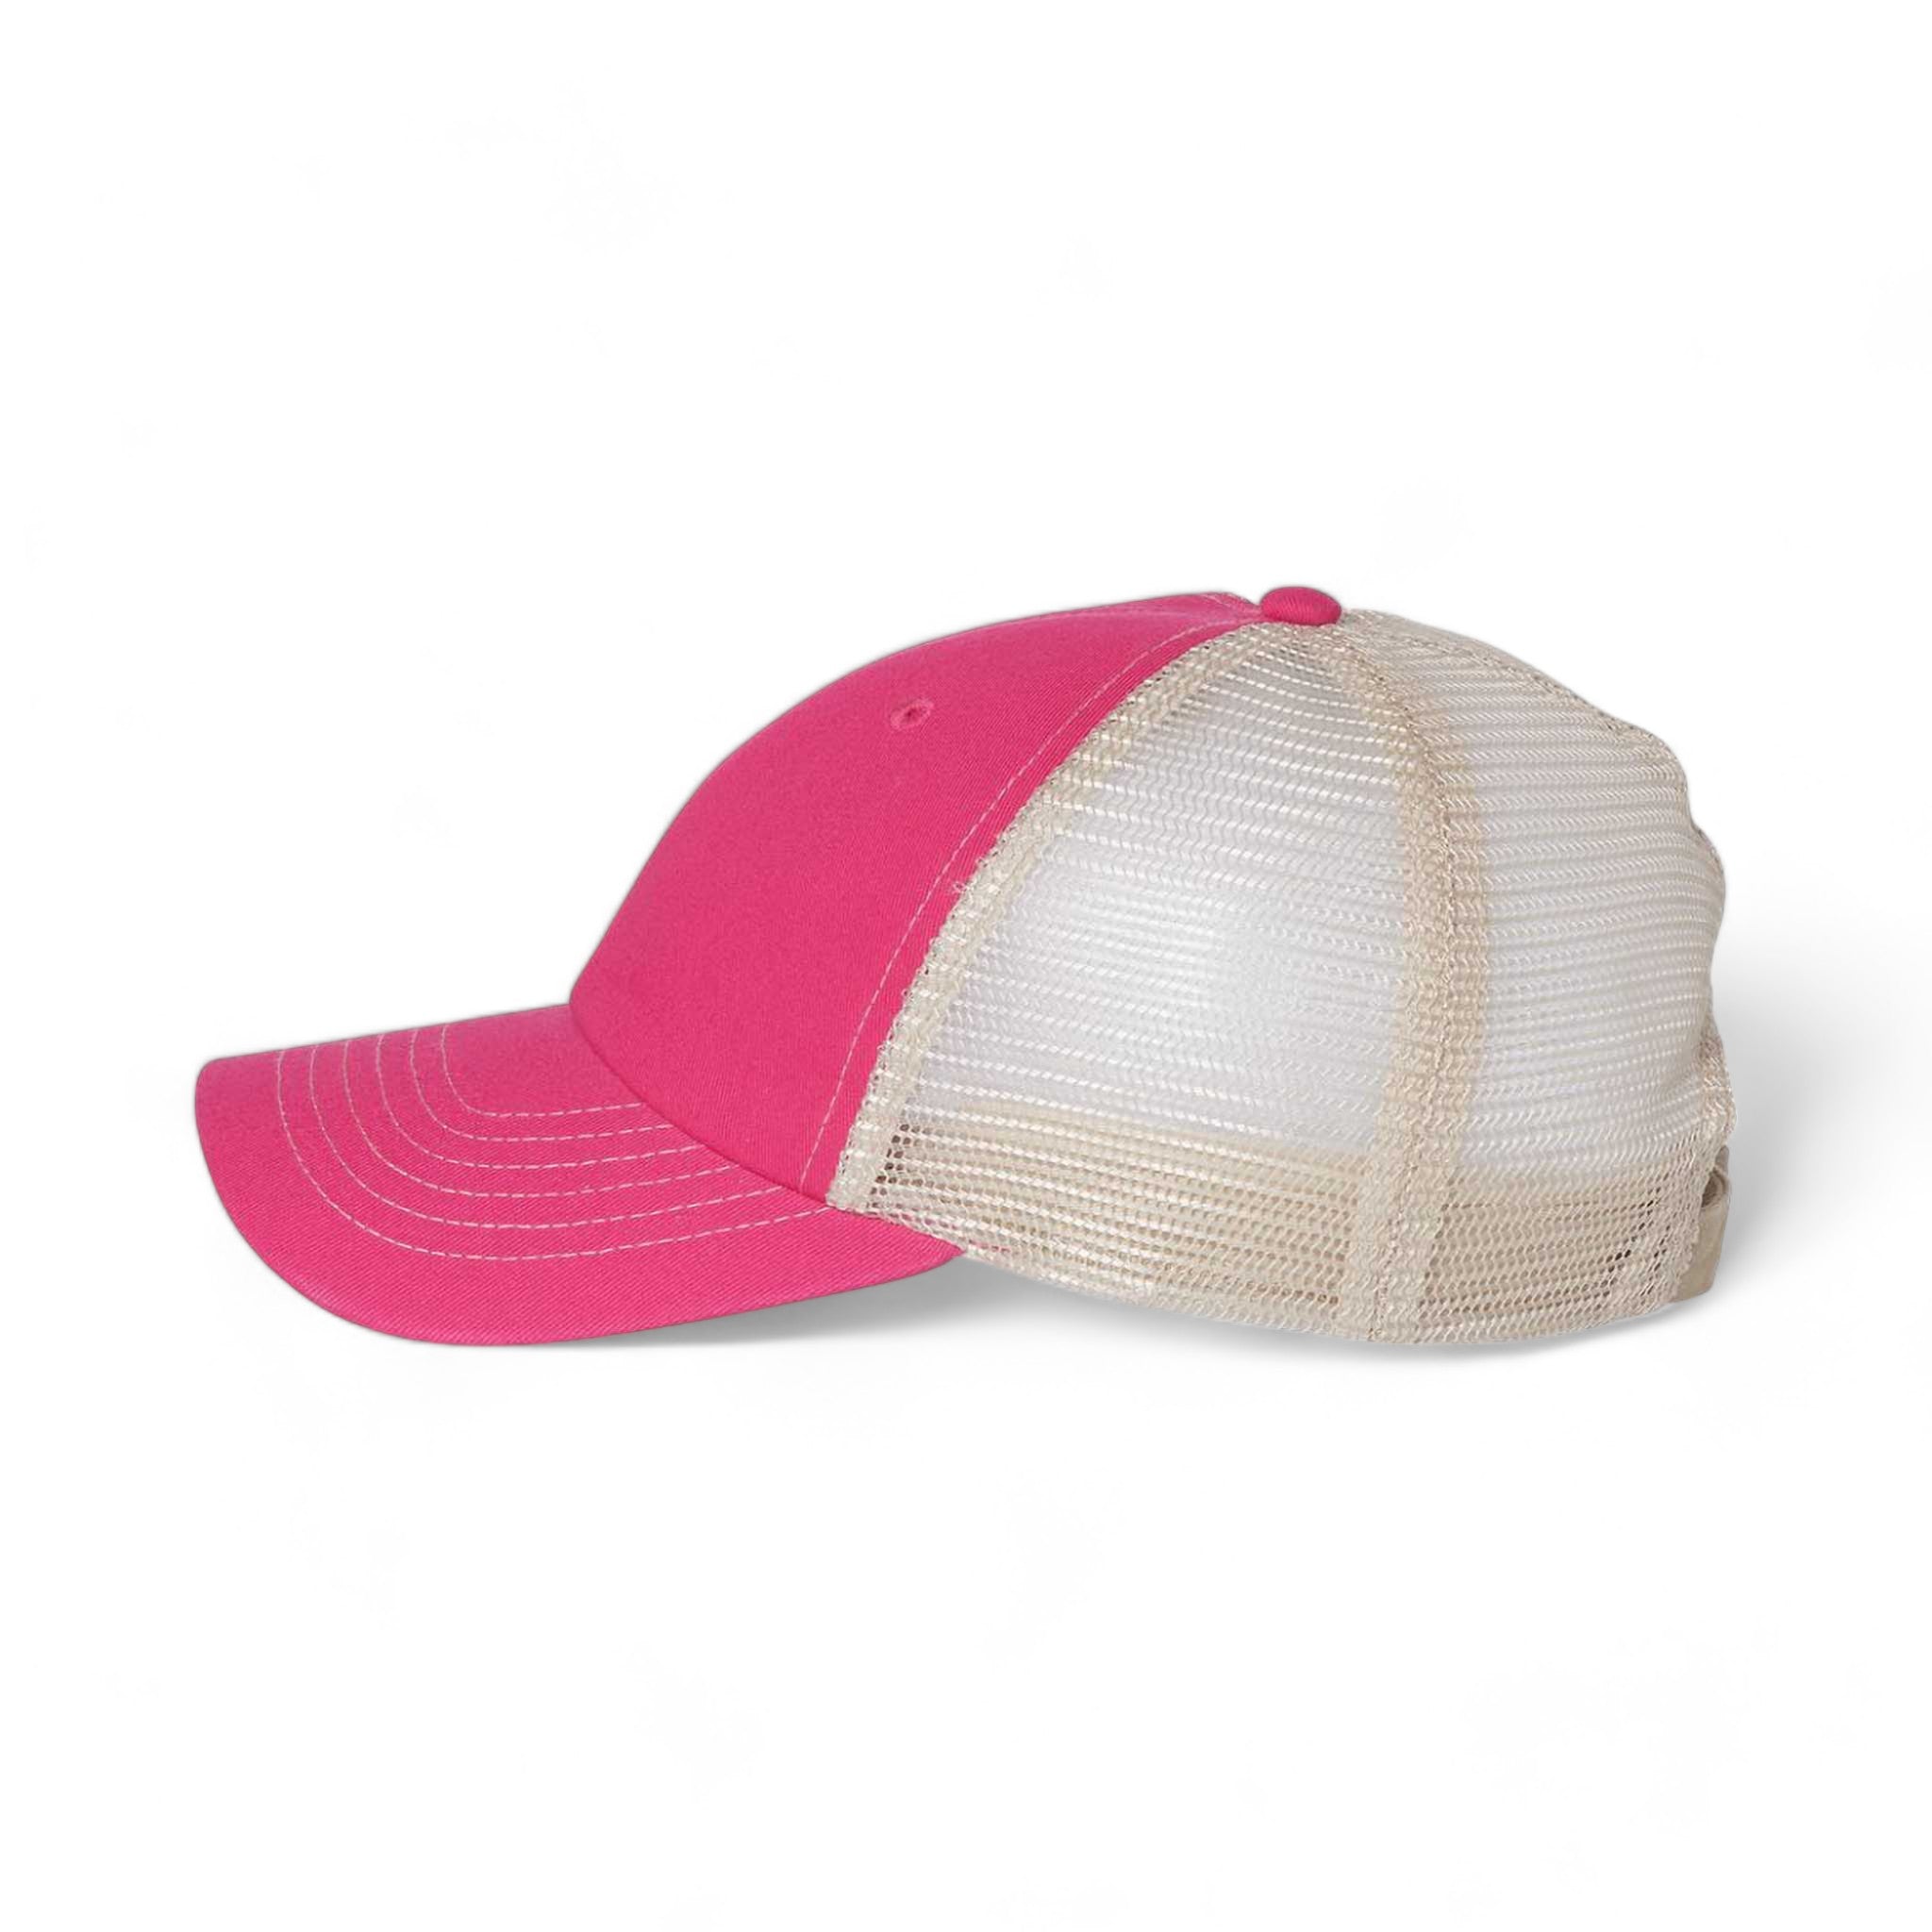 Side view of Sportsman 3100 custom hat in pink and stone